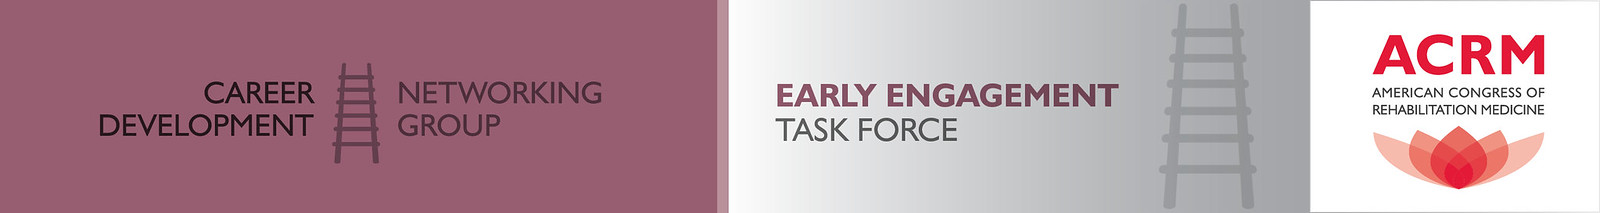 ACRM Early Engagement Task Force header